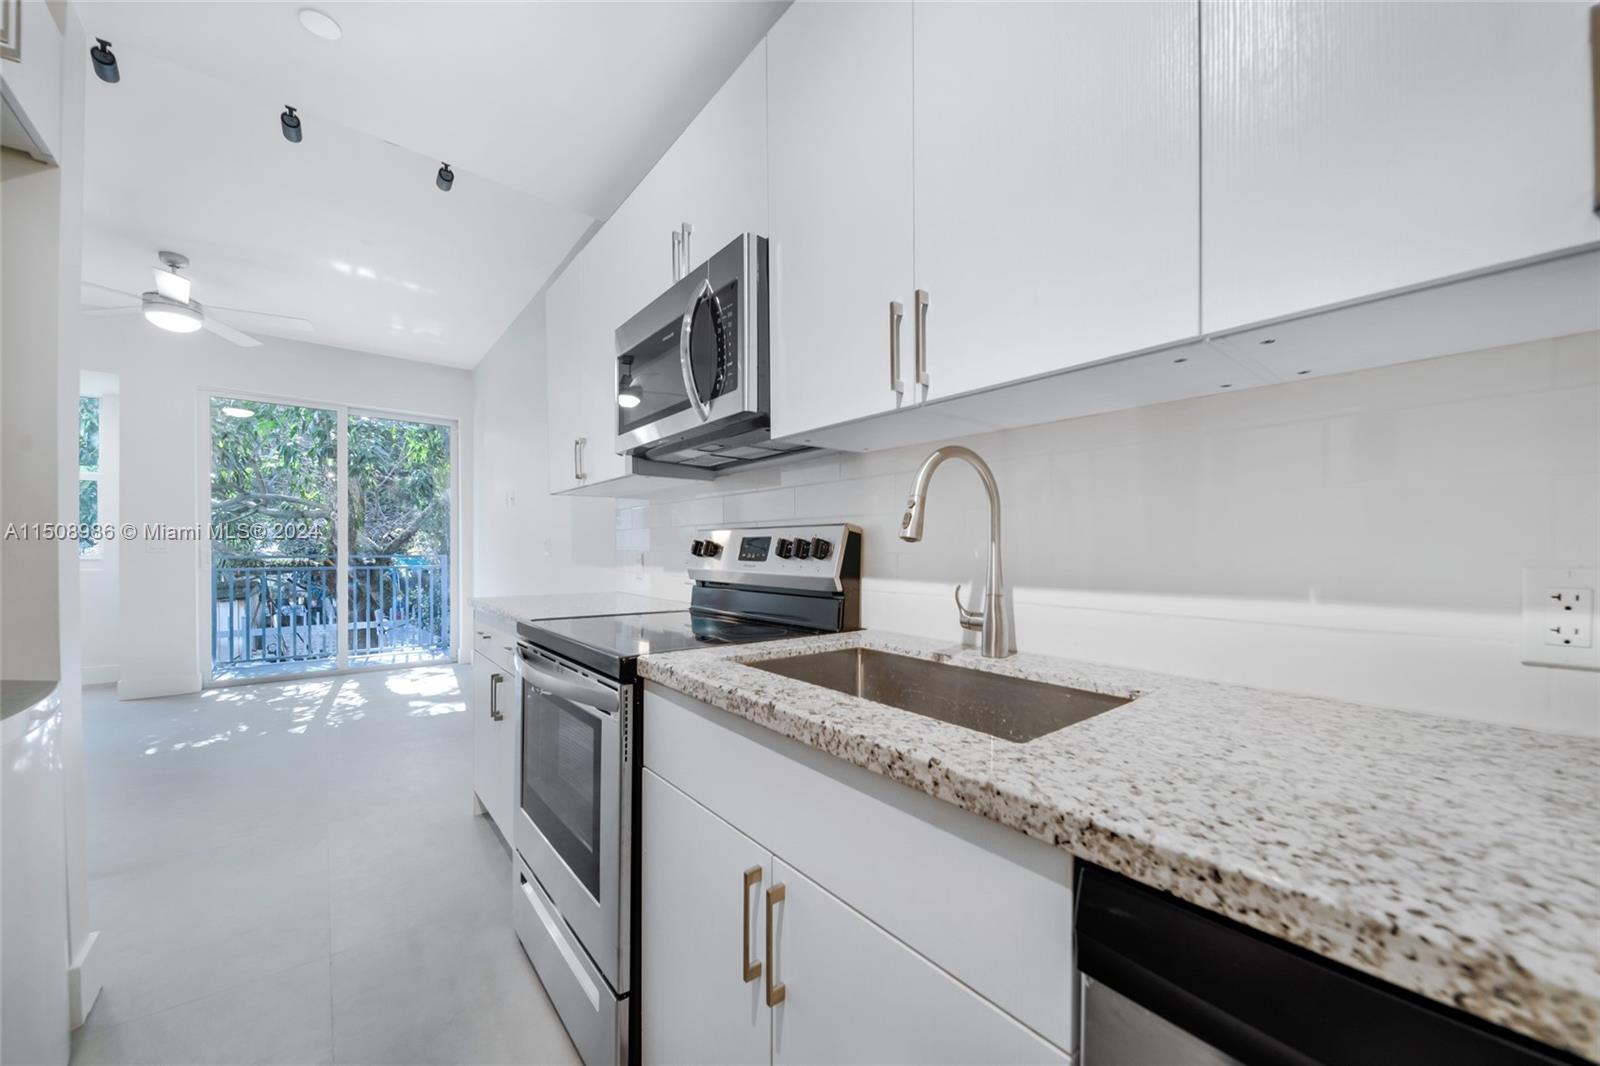 a kitchen with granite countertop a sink stainless steel appliances white cabinets and a granite counter tops